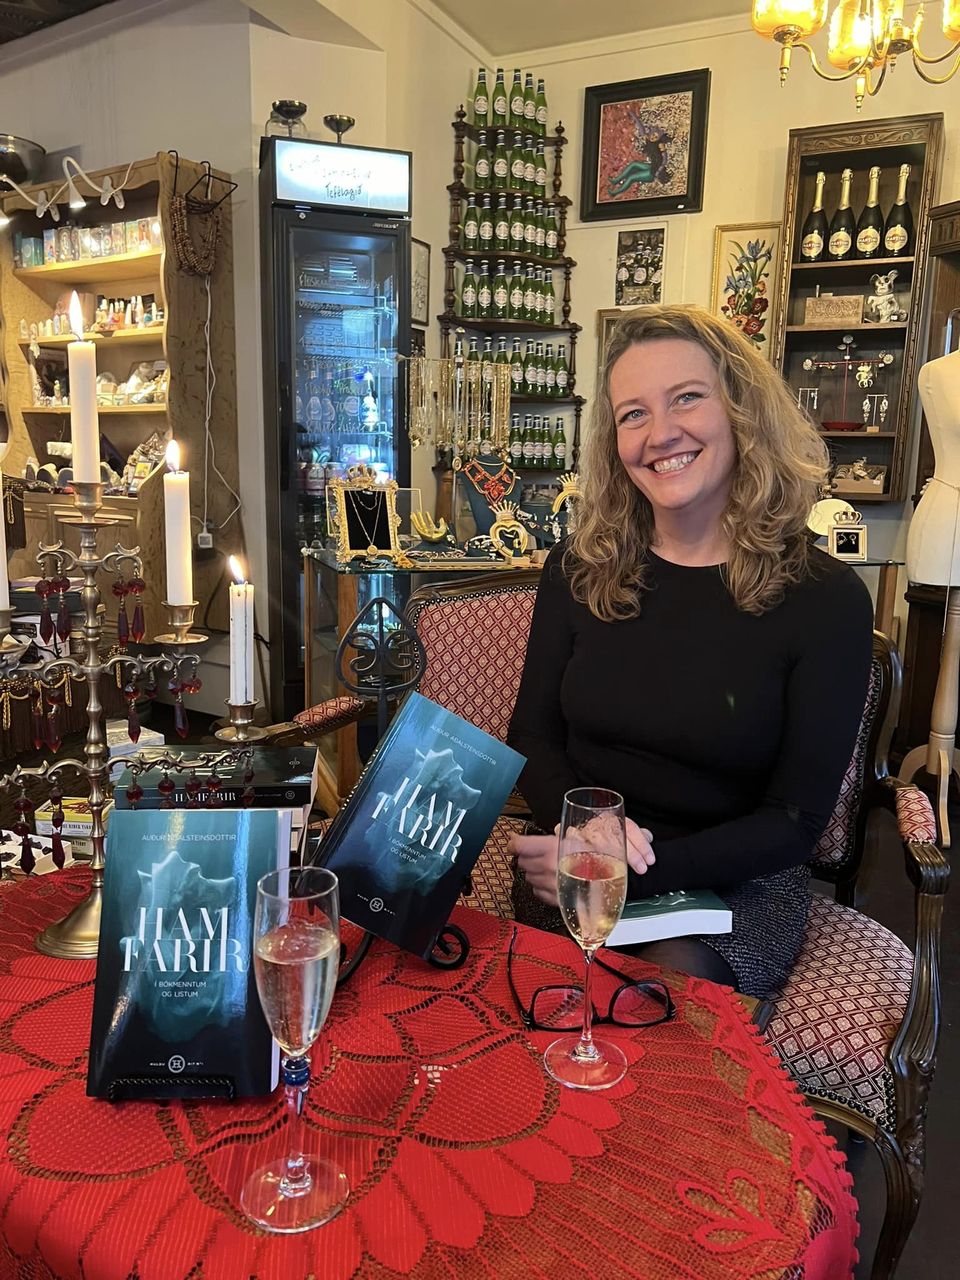 Audur at a table with copies of her new book.